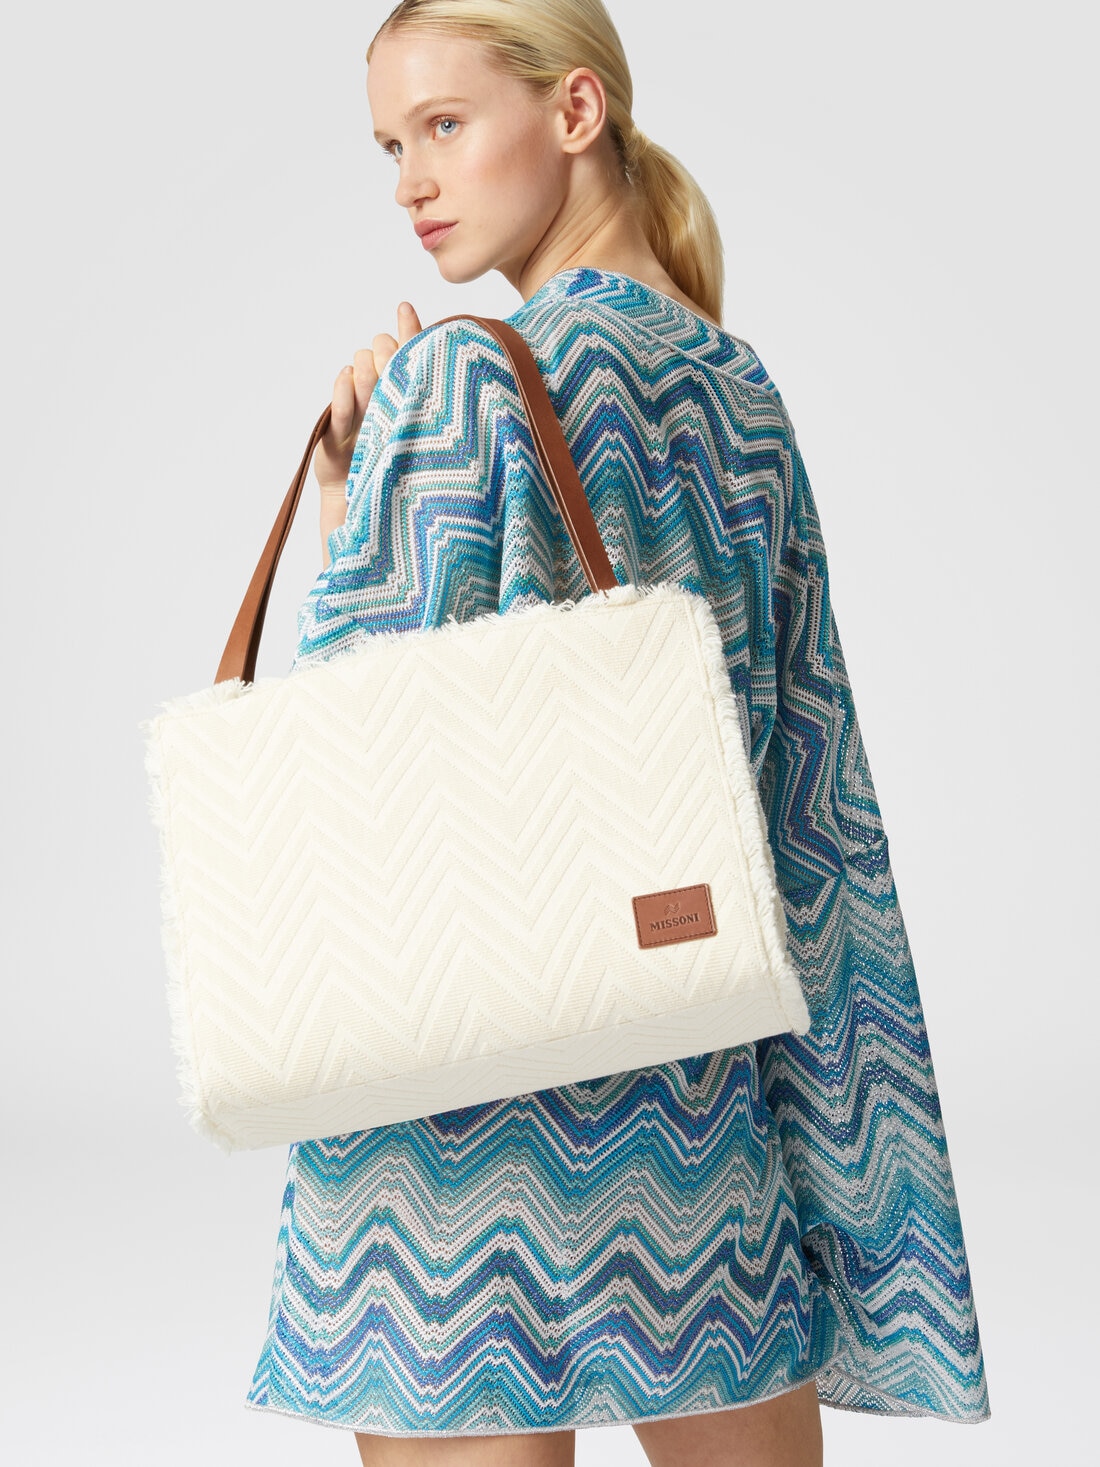 Tote bag in cotton blend with chevron pattern, Brown - 8053147143231 - 4